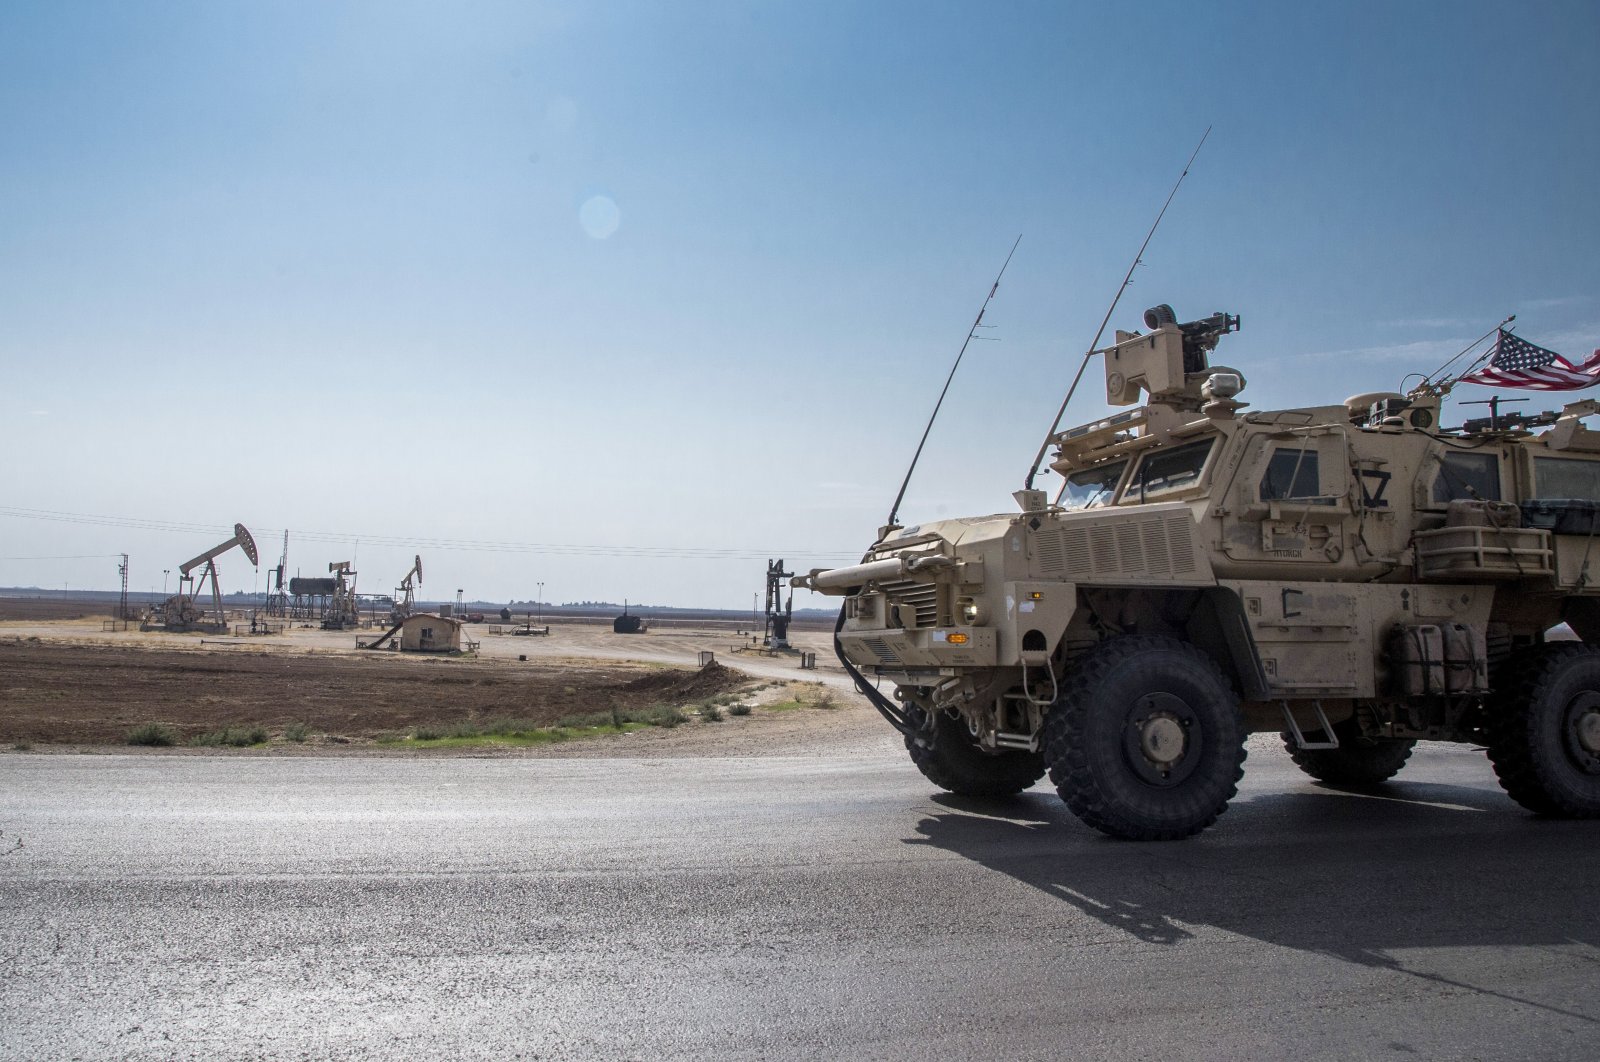 U.S. forces patrol the YPG terrorist group-controlled oil fields in northeast Syria, Oct. 28, 2019, (AP Photo)